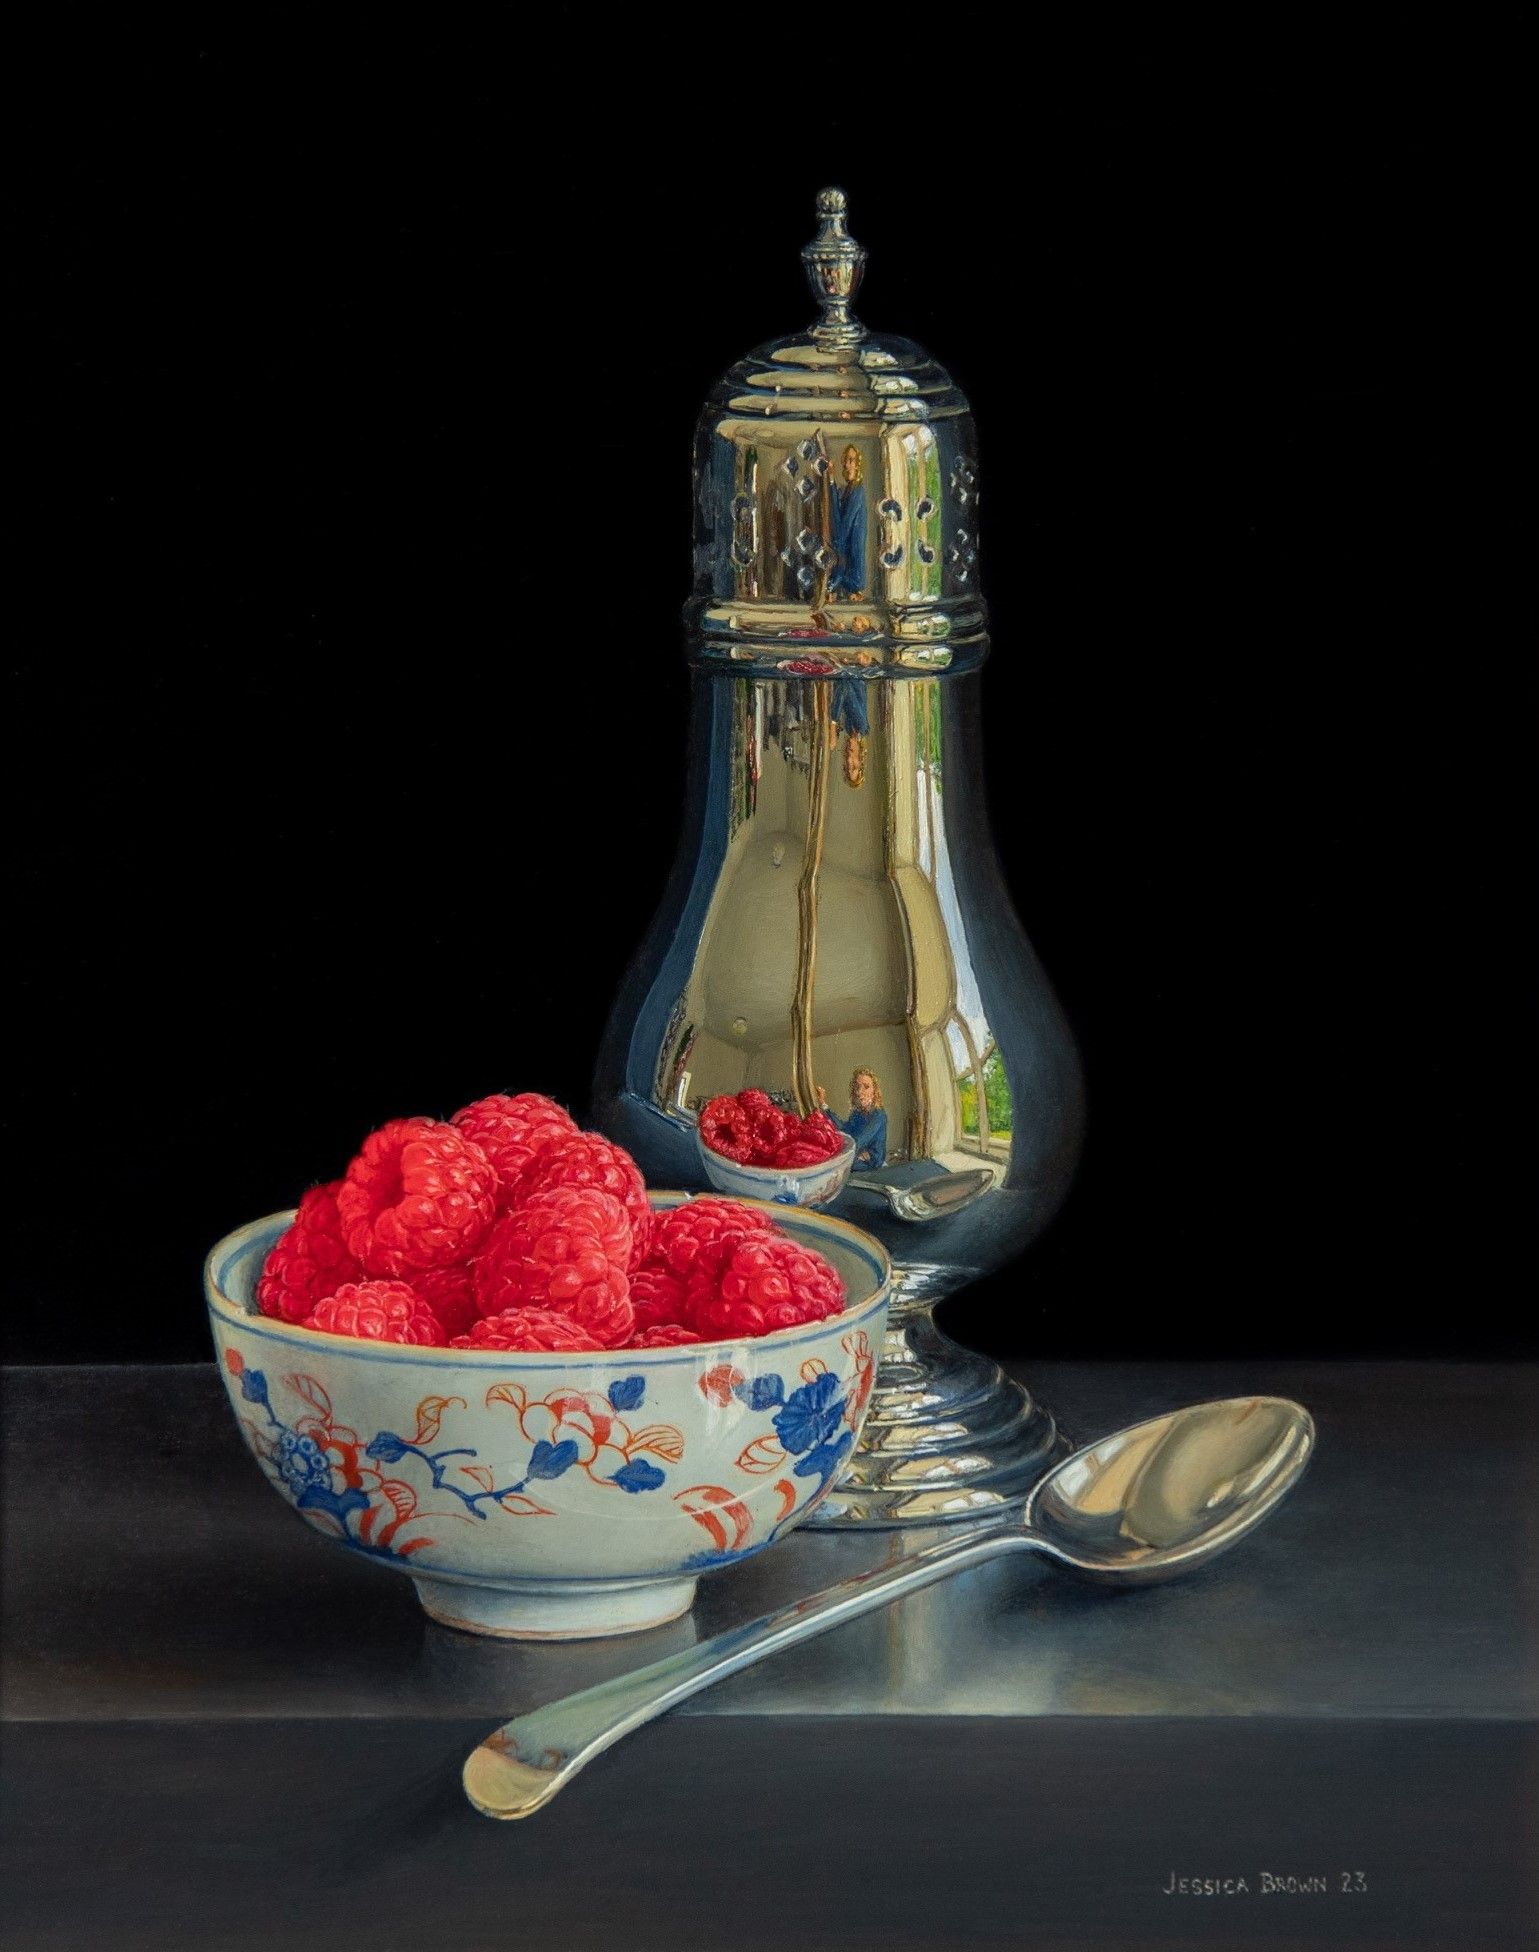 Still Life with Sugar Shaker and Raspberries in an Imari Bowl by Jessica Brown